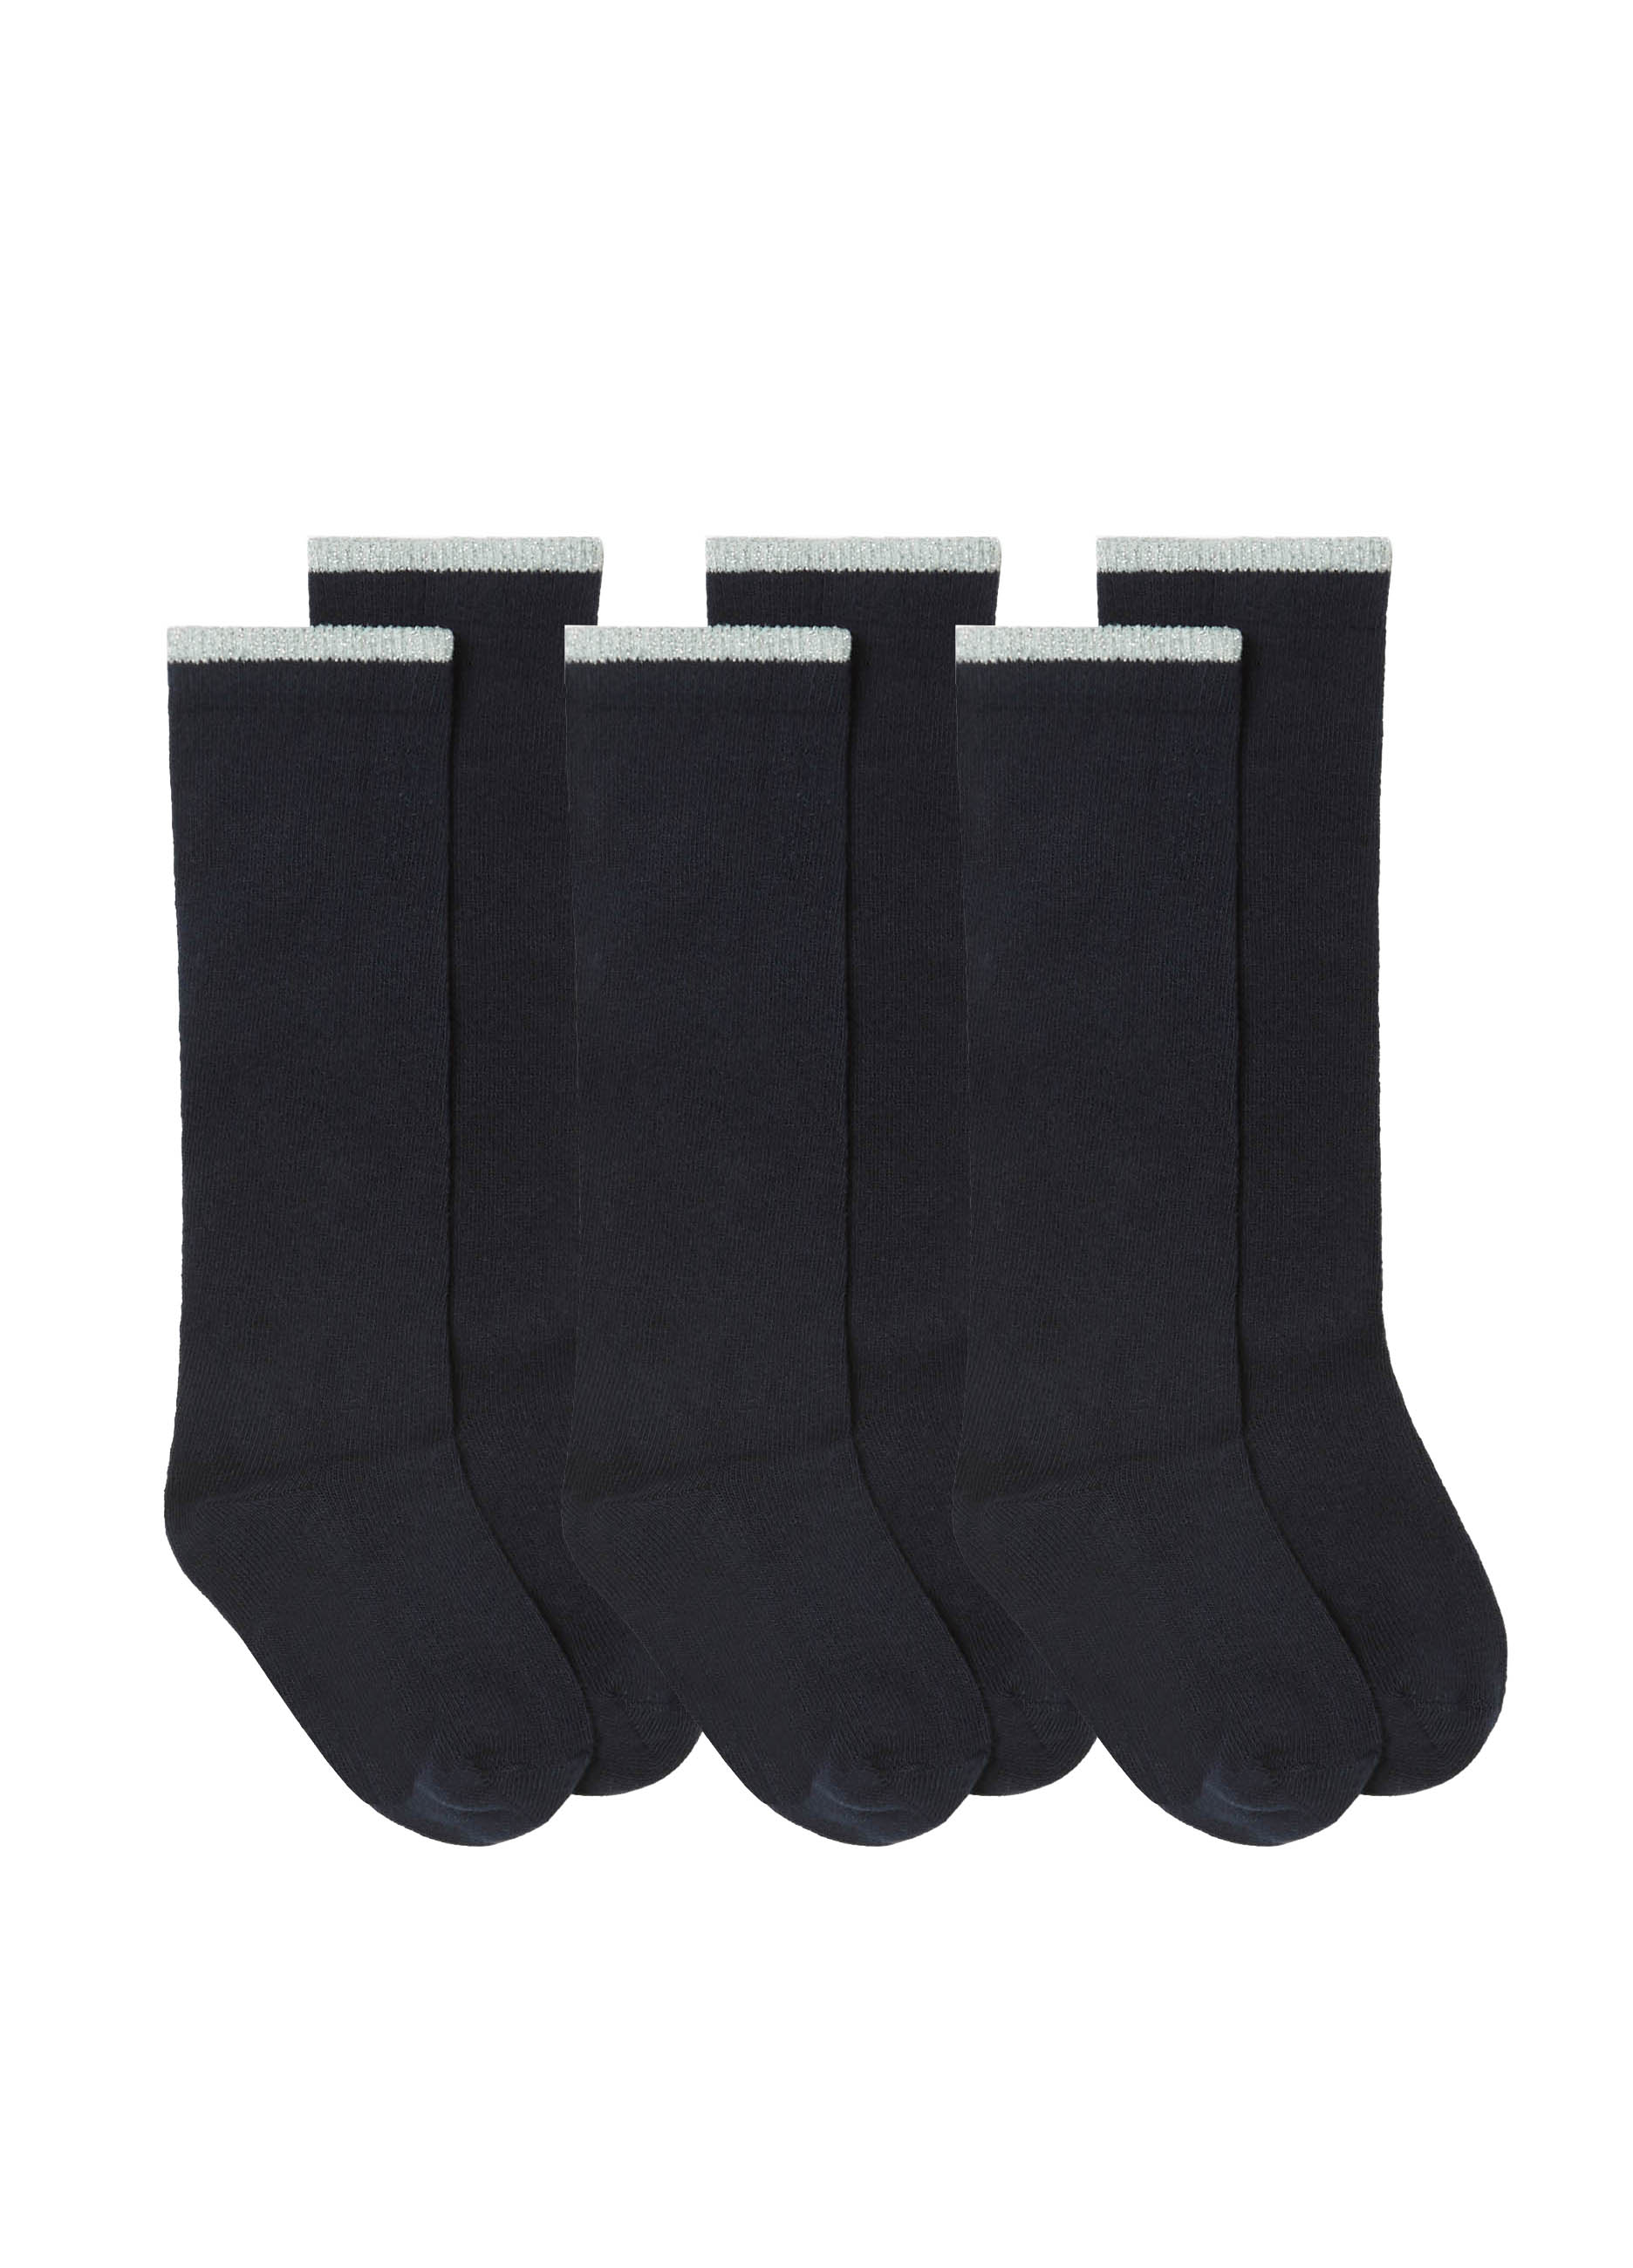 GIRL - Long stretch socks with ribbing, 3 pieces pack.